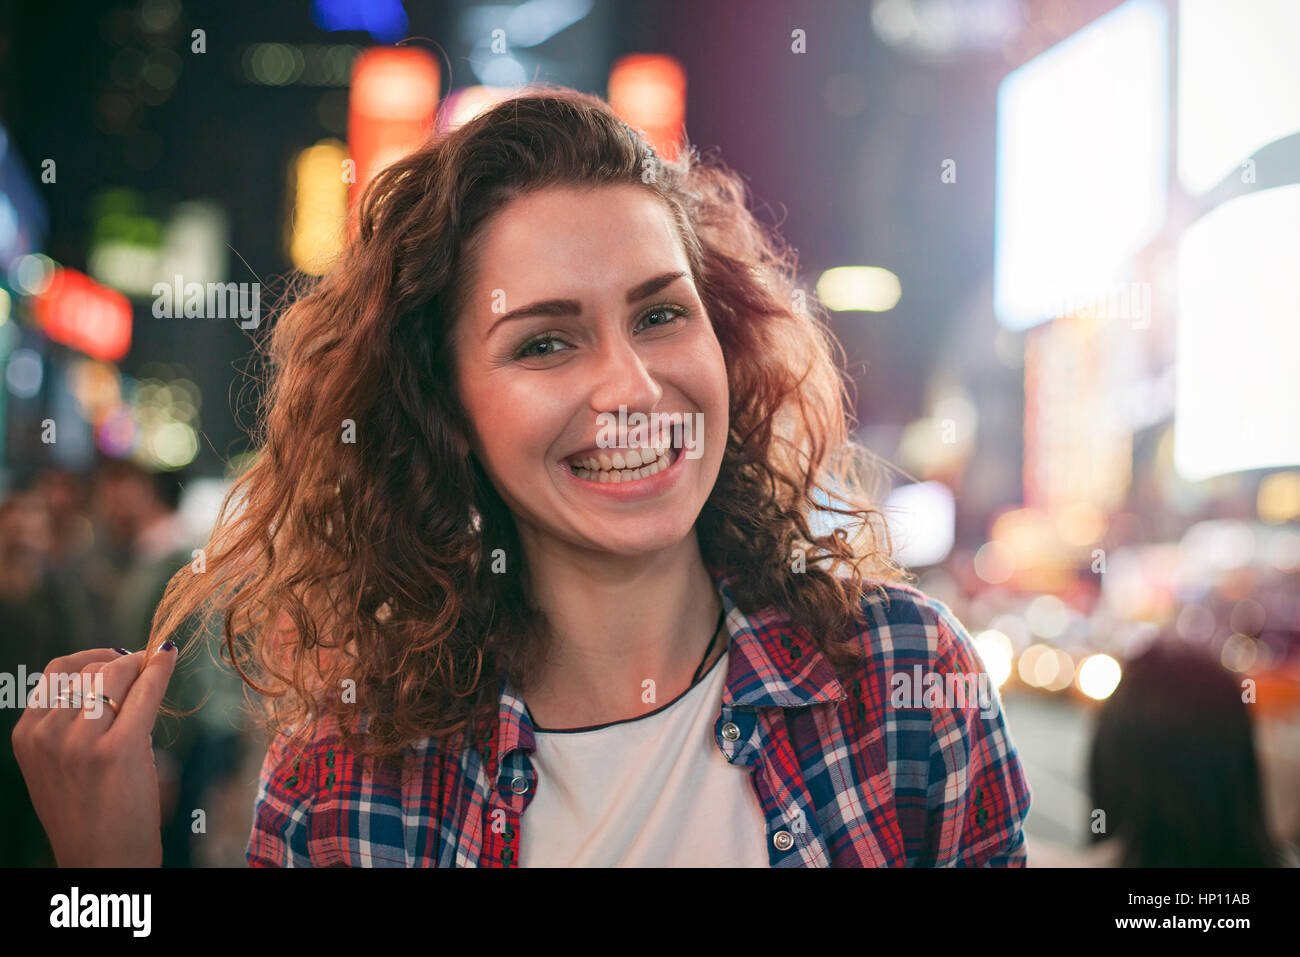 Young woman standing in illuminated city street Stock Photo